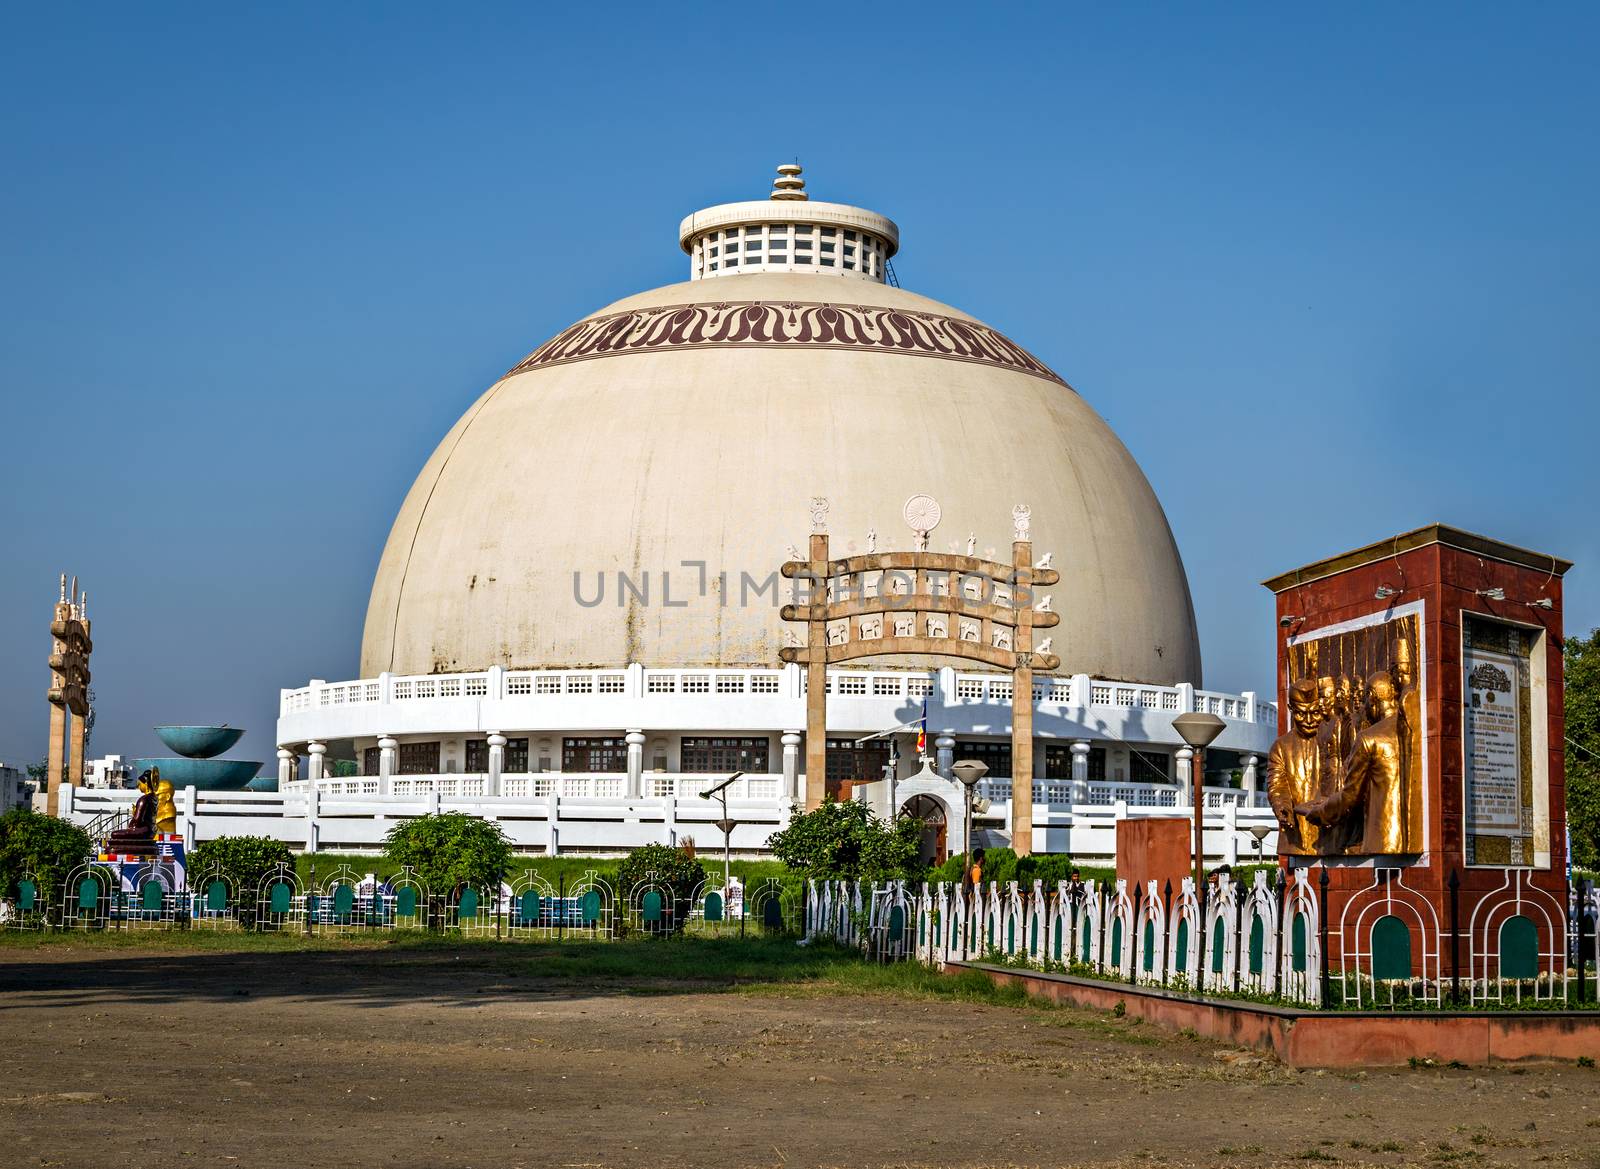 Deekshabhoomi is in Nagpur, Maharashtra, a location regarded as a pilgrimage center of Buddhism in India.